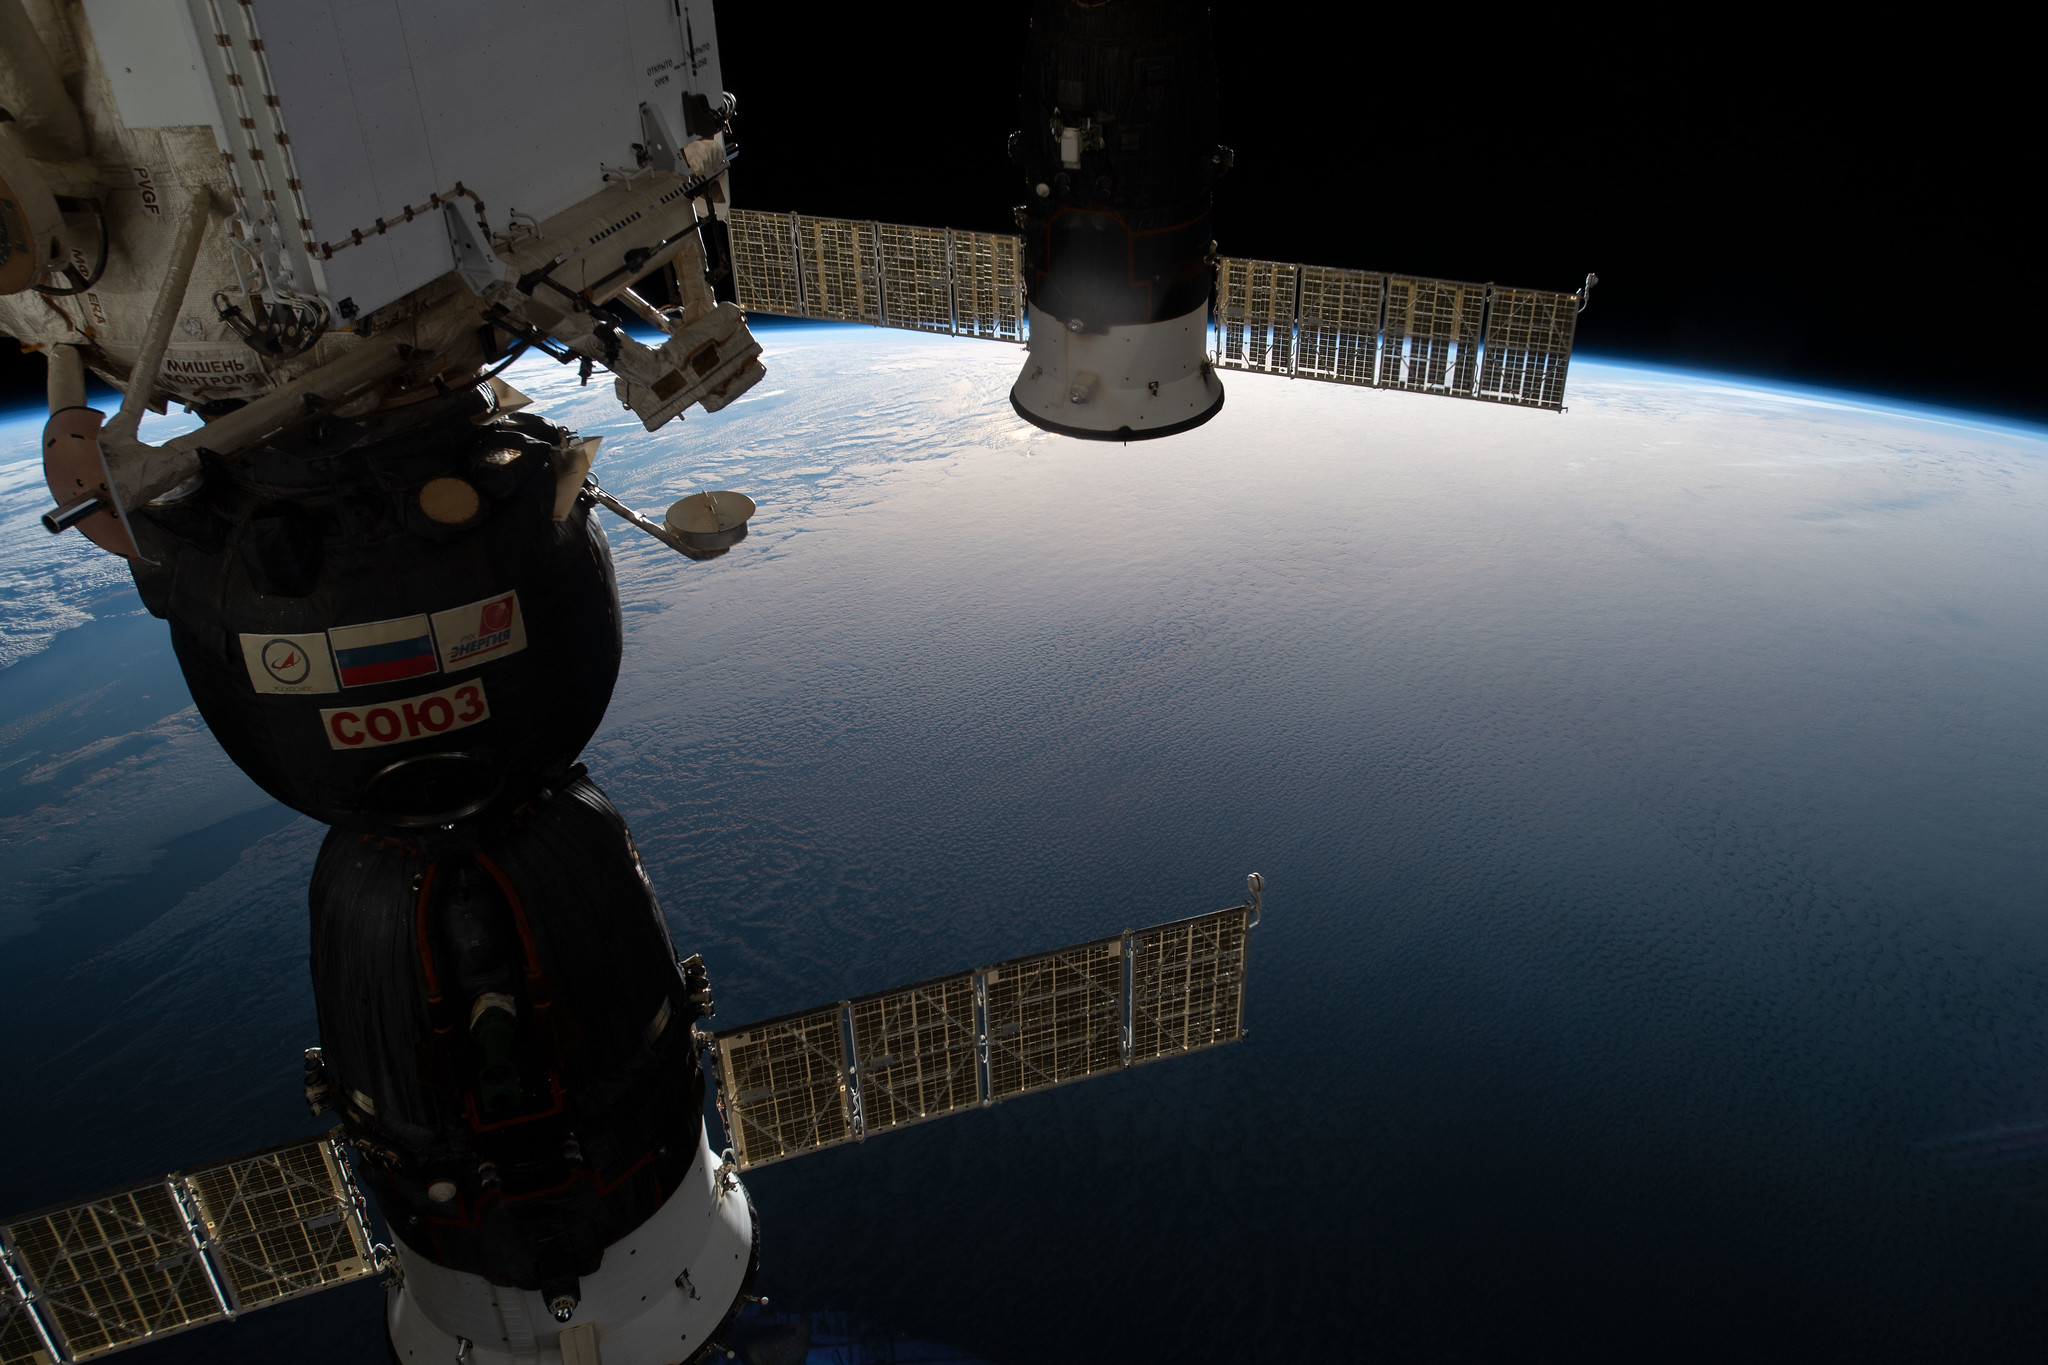 Two docked Russian spaceships, including the Soyuz MS-12 crew craft and the Progress 72 space freighter, are seen in this photo.